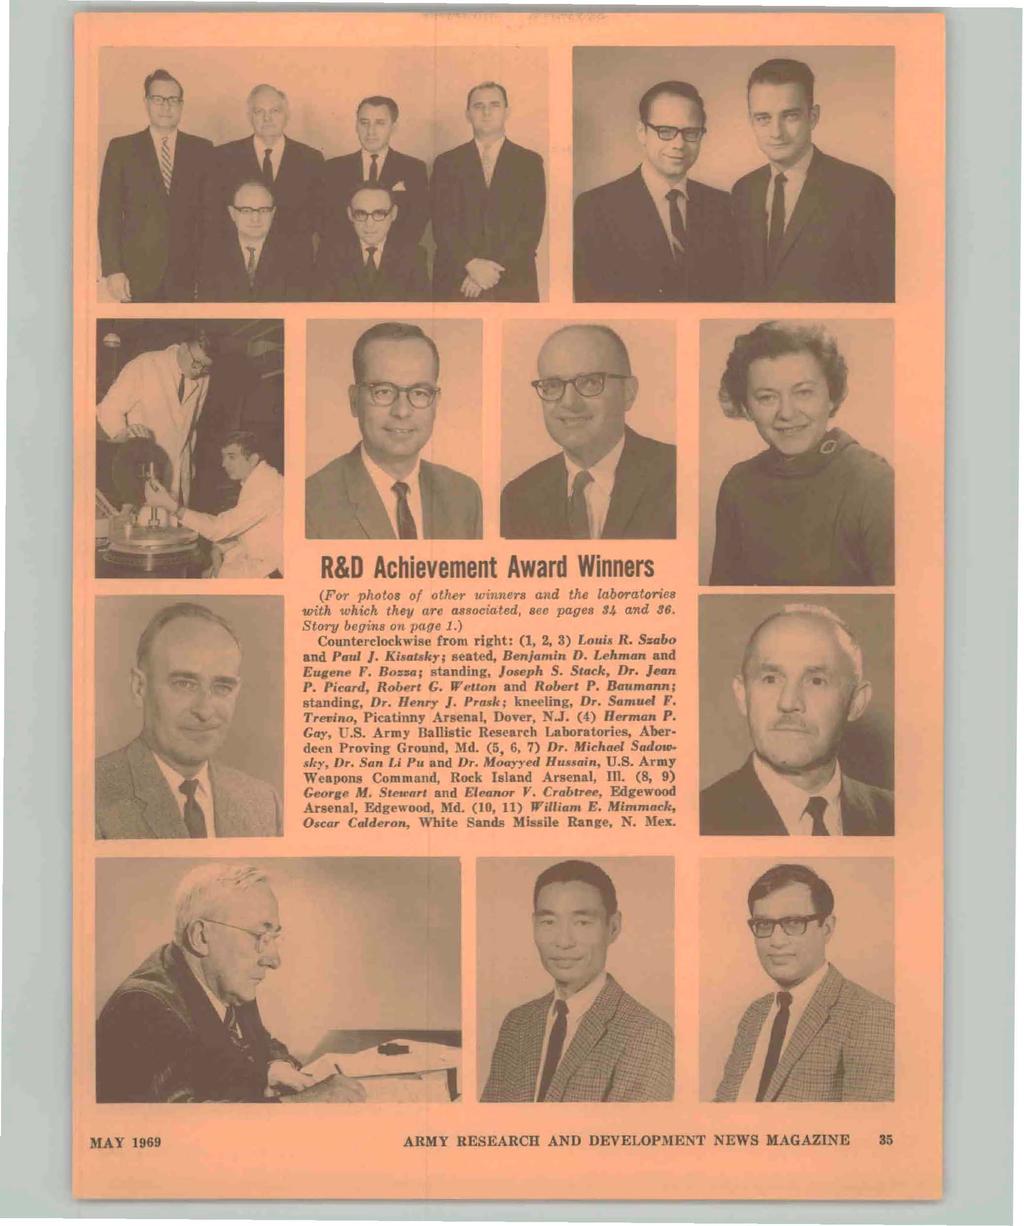 R&D Achievement Award Winners (For phouls of otlulr wi"ners alld the laboraulriee with which they are absociated, see pagee $-' and 86. Story begine on page 1.